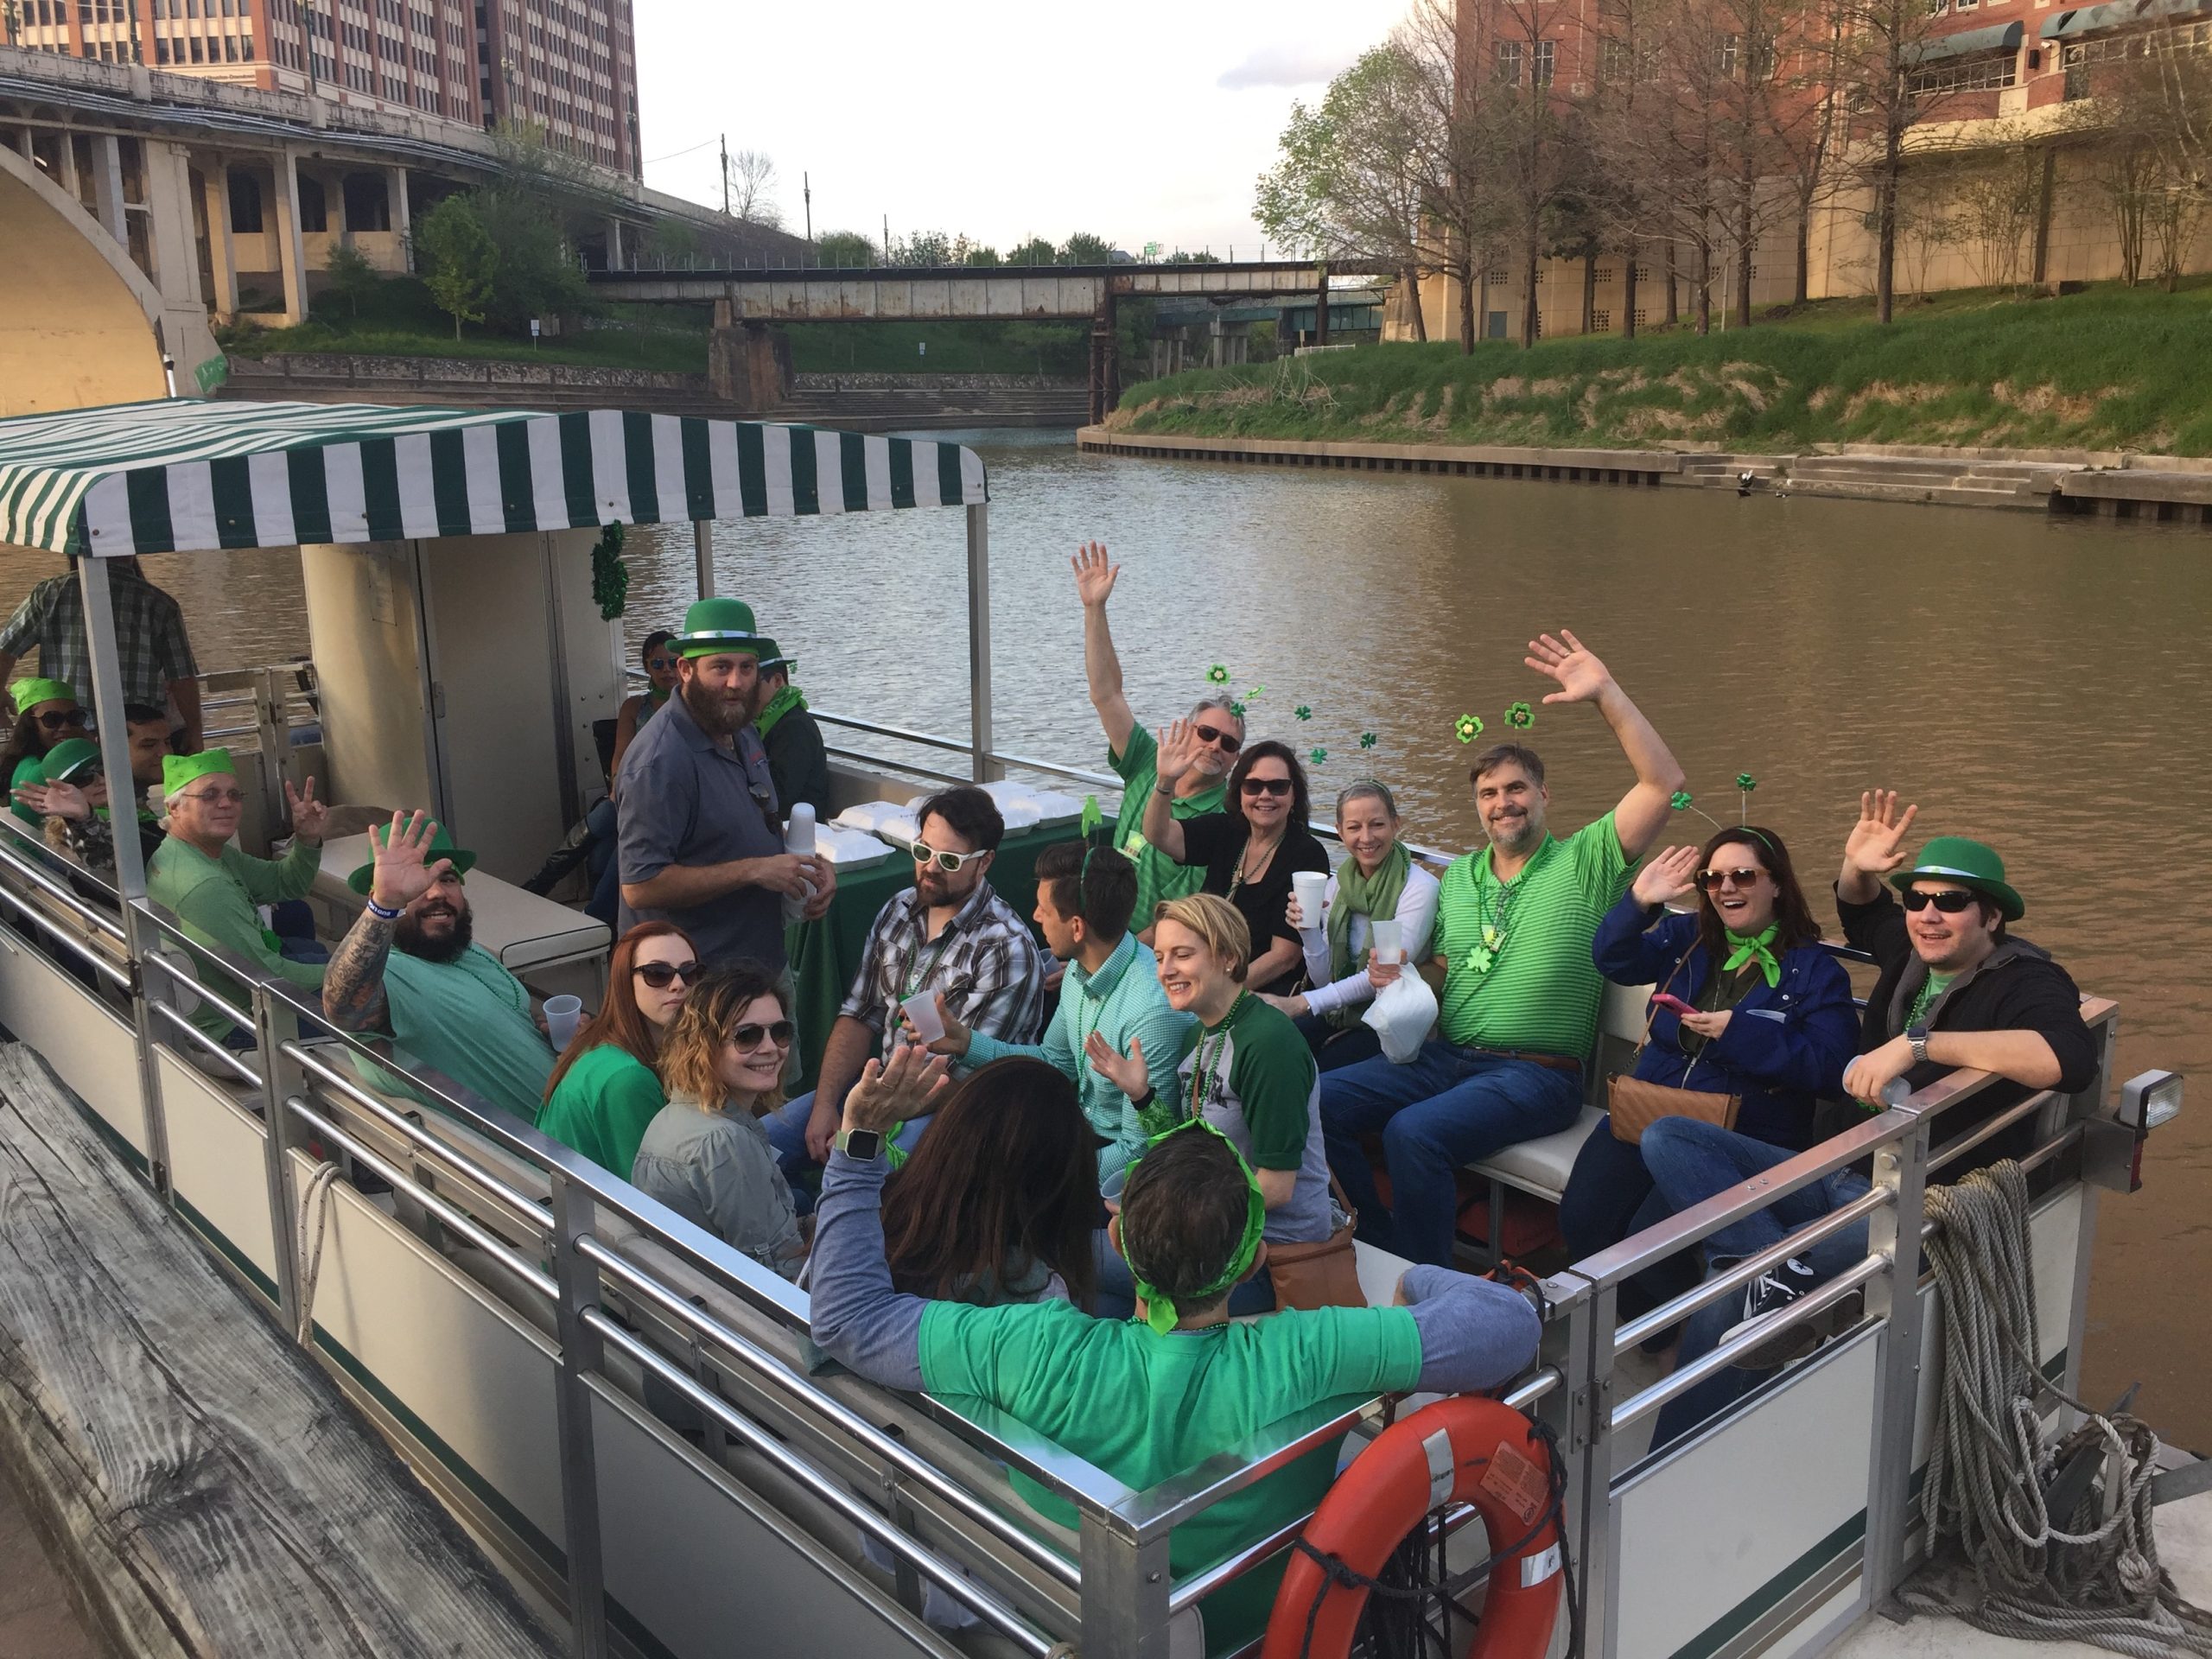 Image SUSPENDED: Luck of the Irish Boat Tour